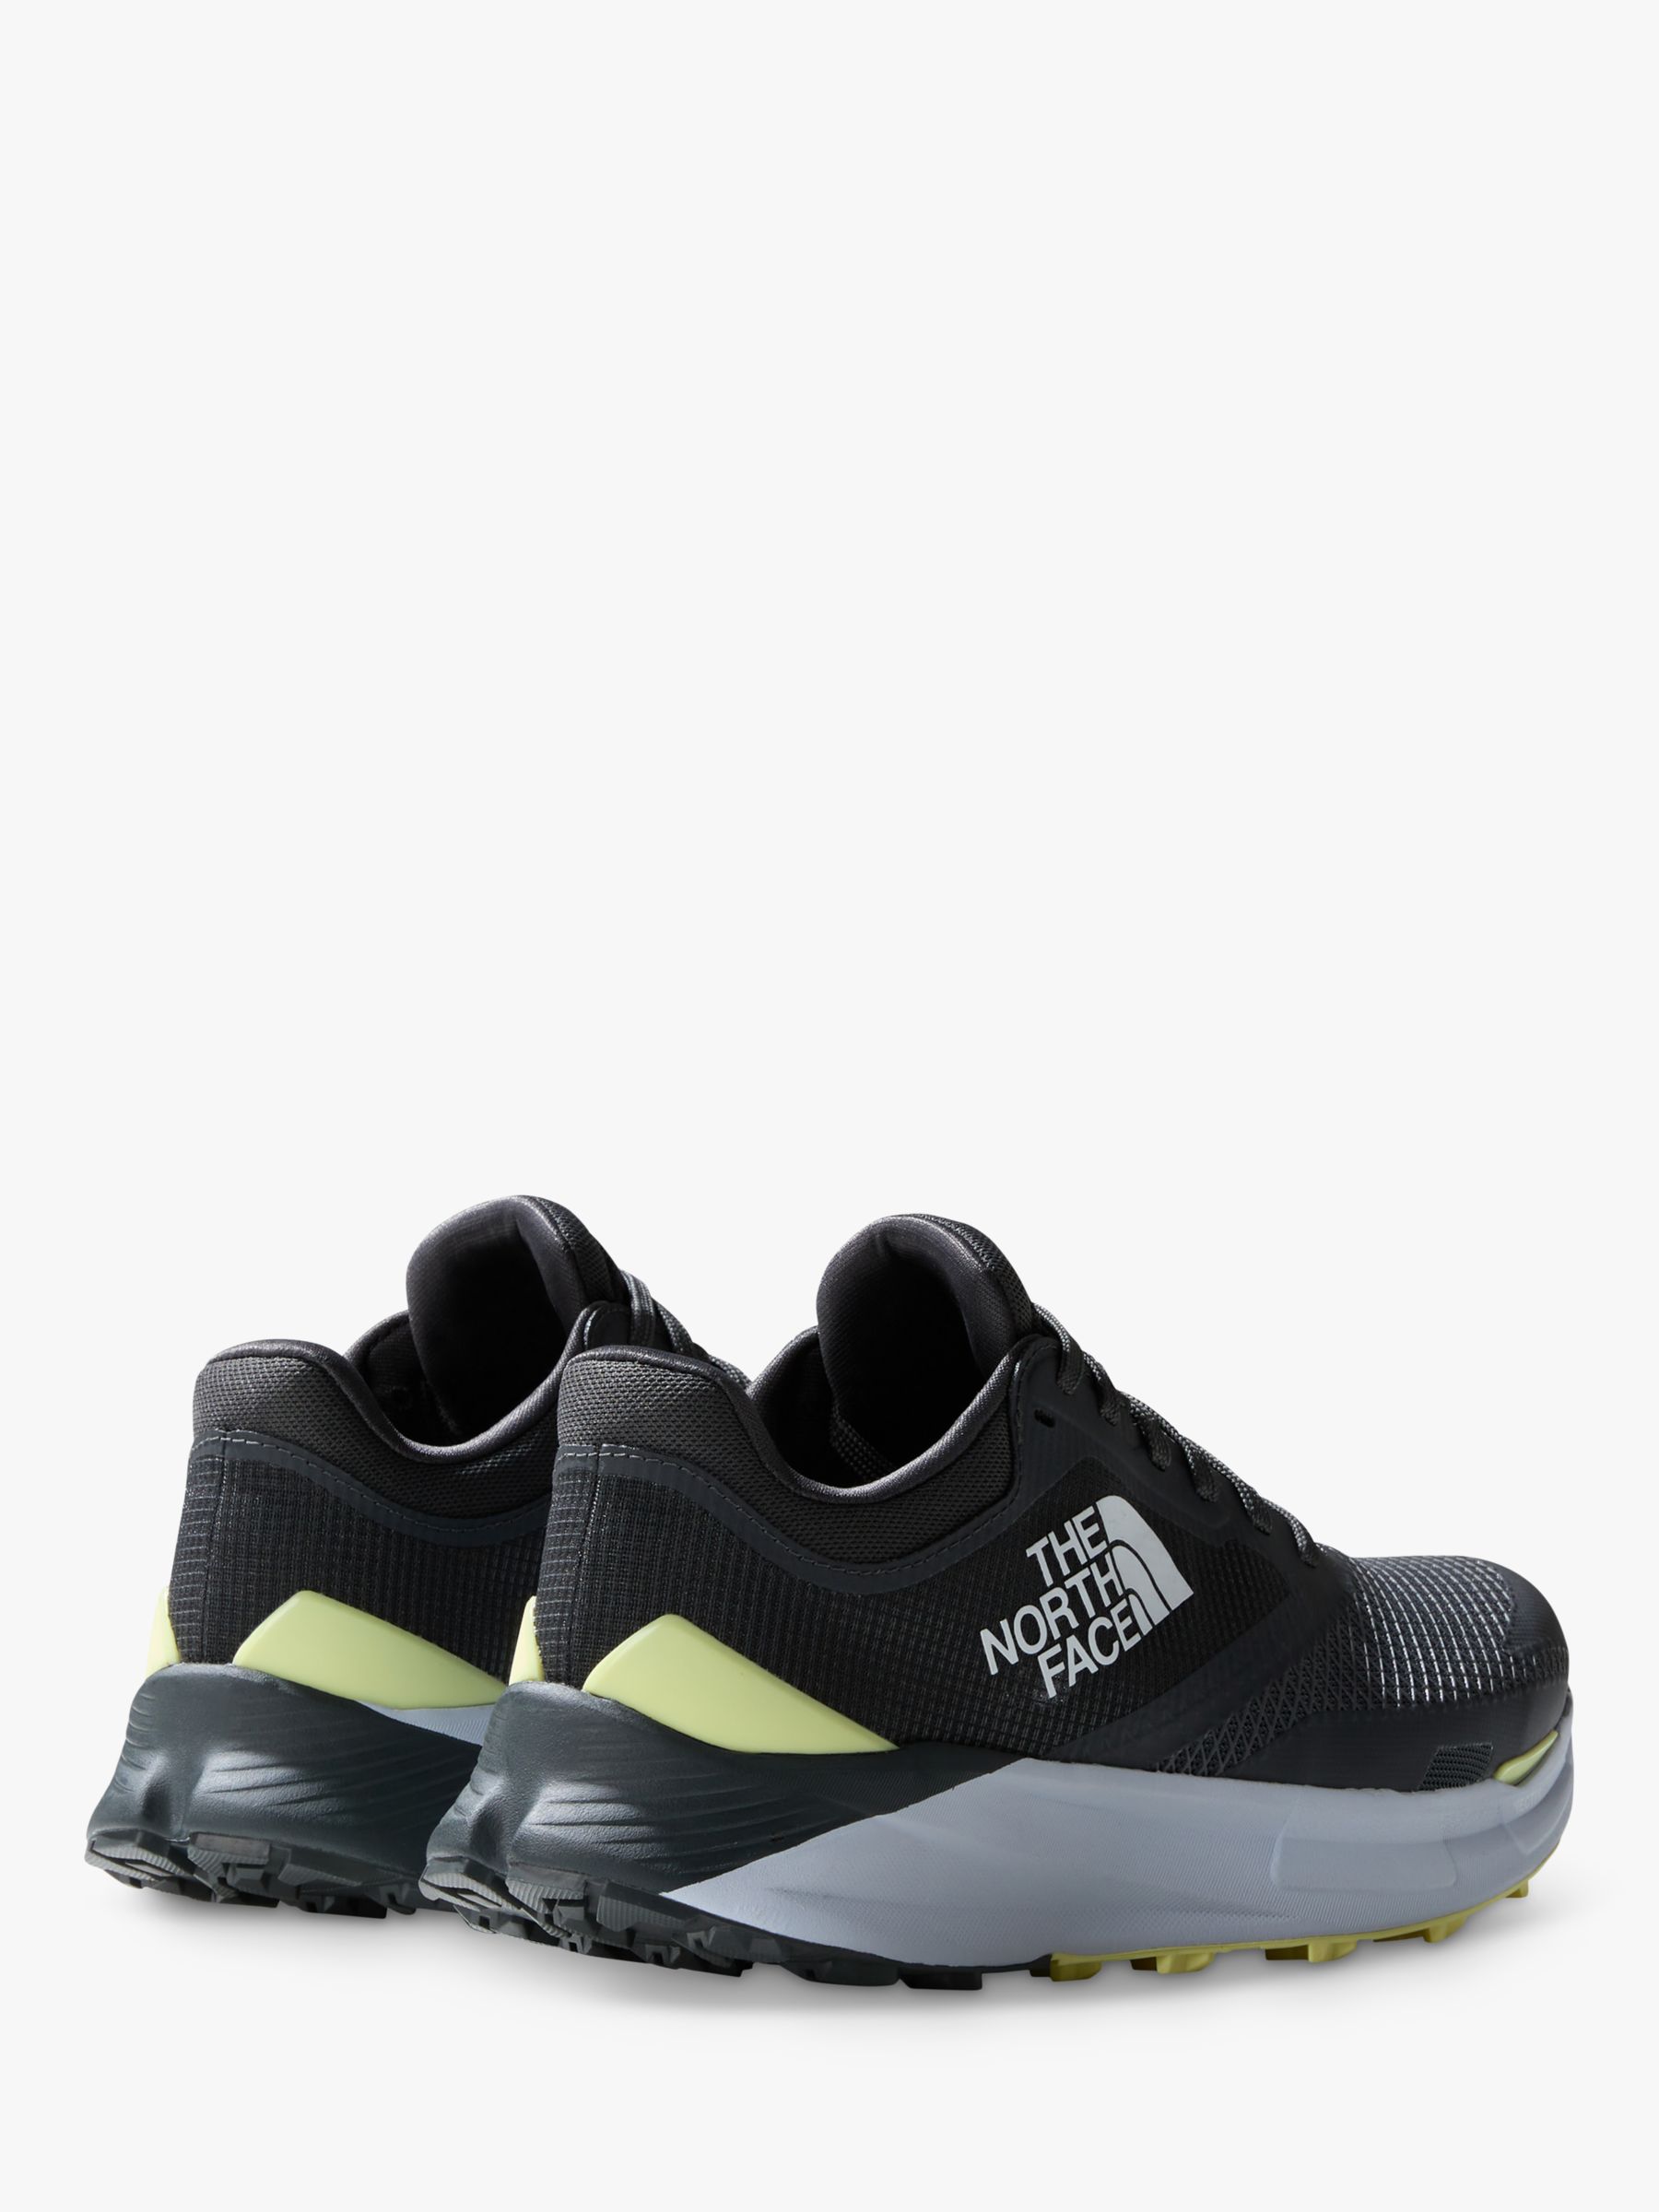 Buy The North Face Vectiv Enduris III Trail Running Shoes, Grey Online at johnlewis.com